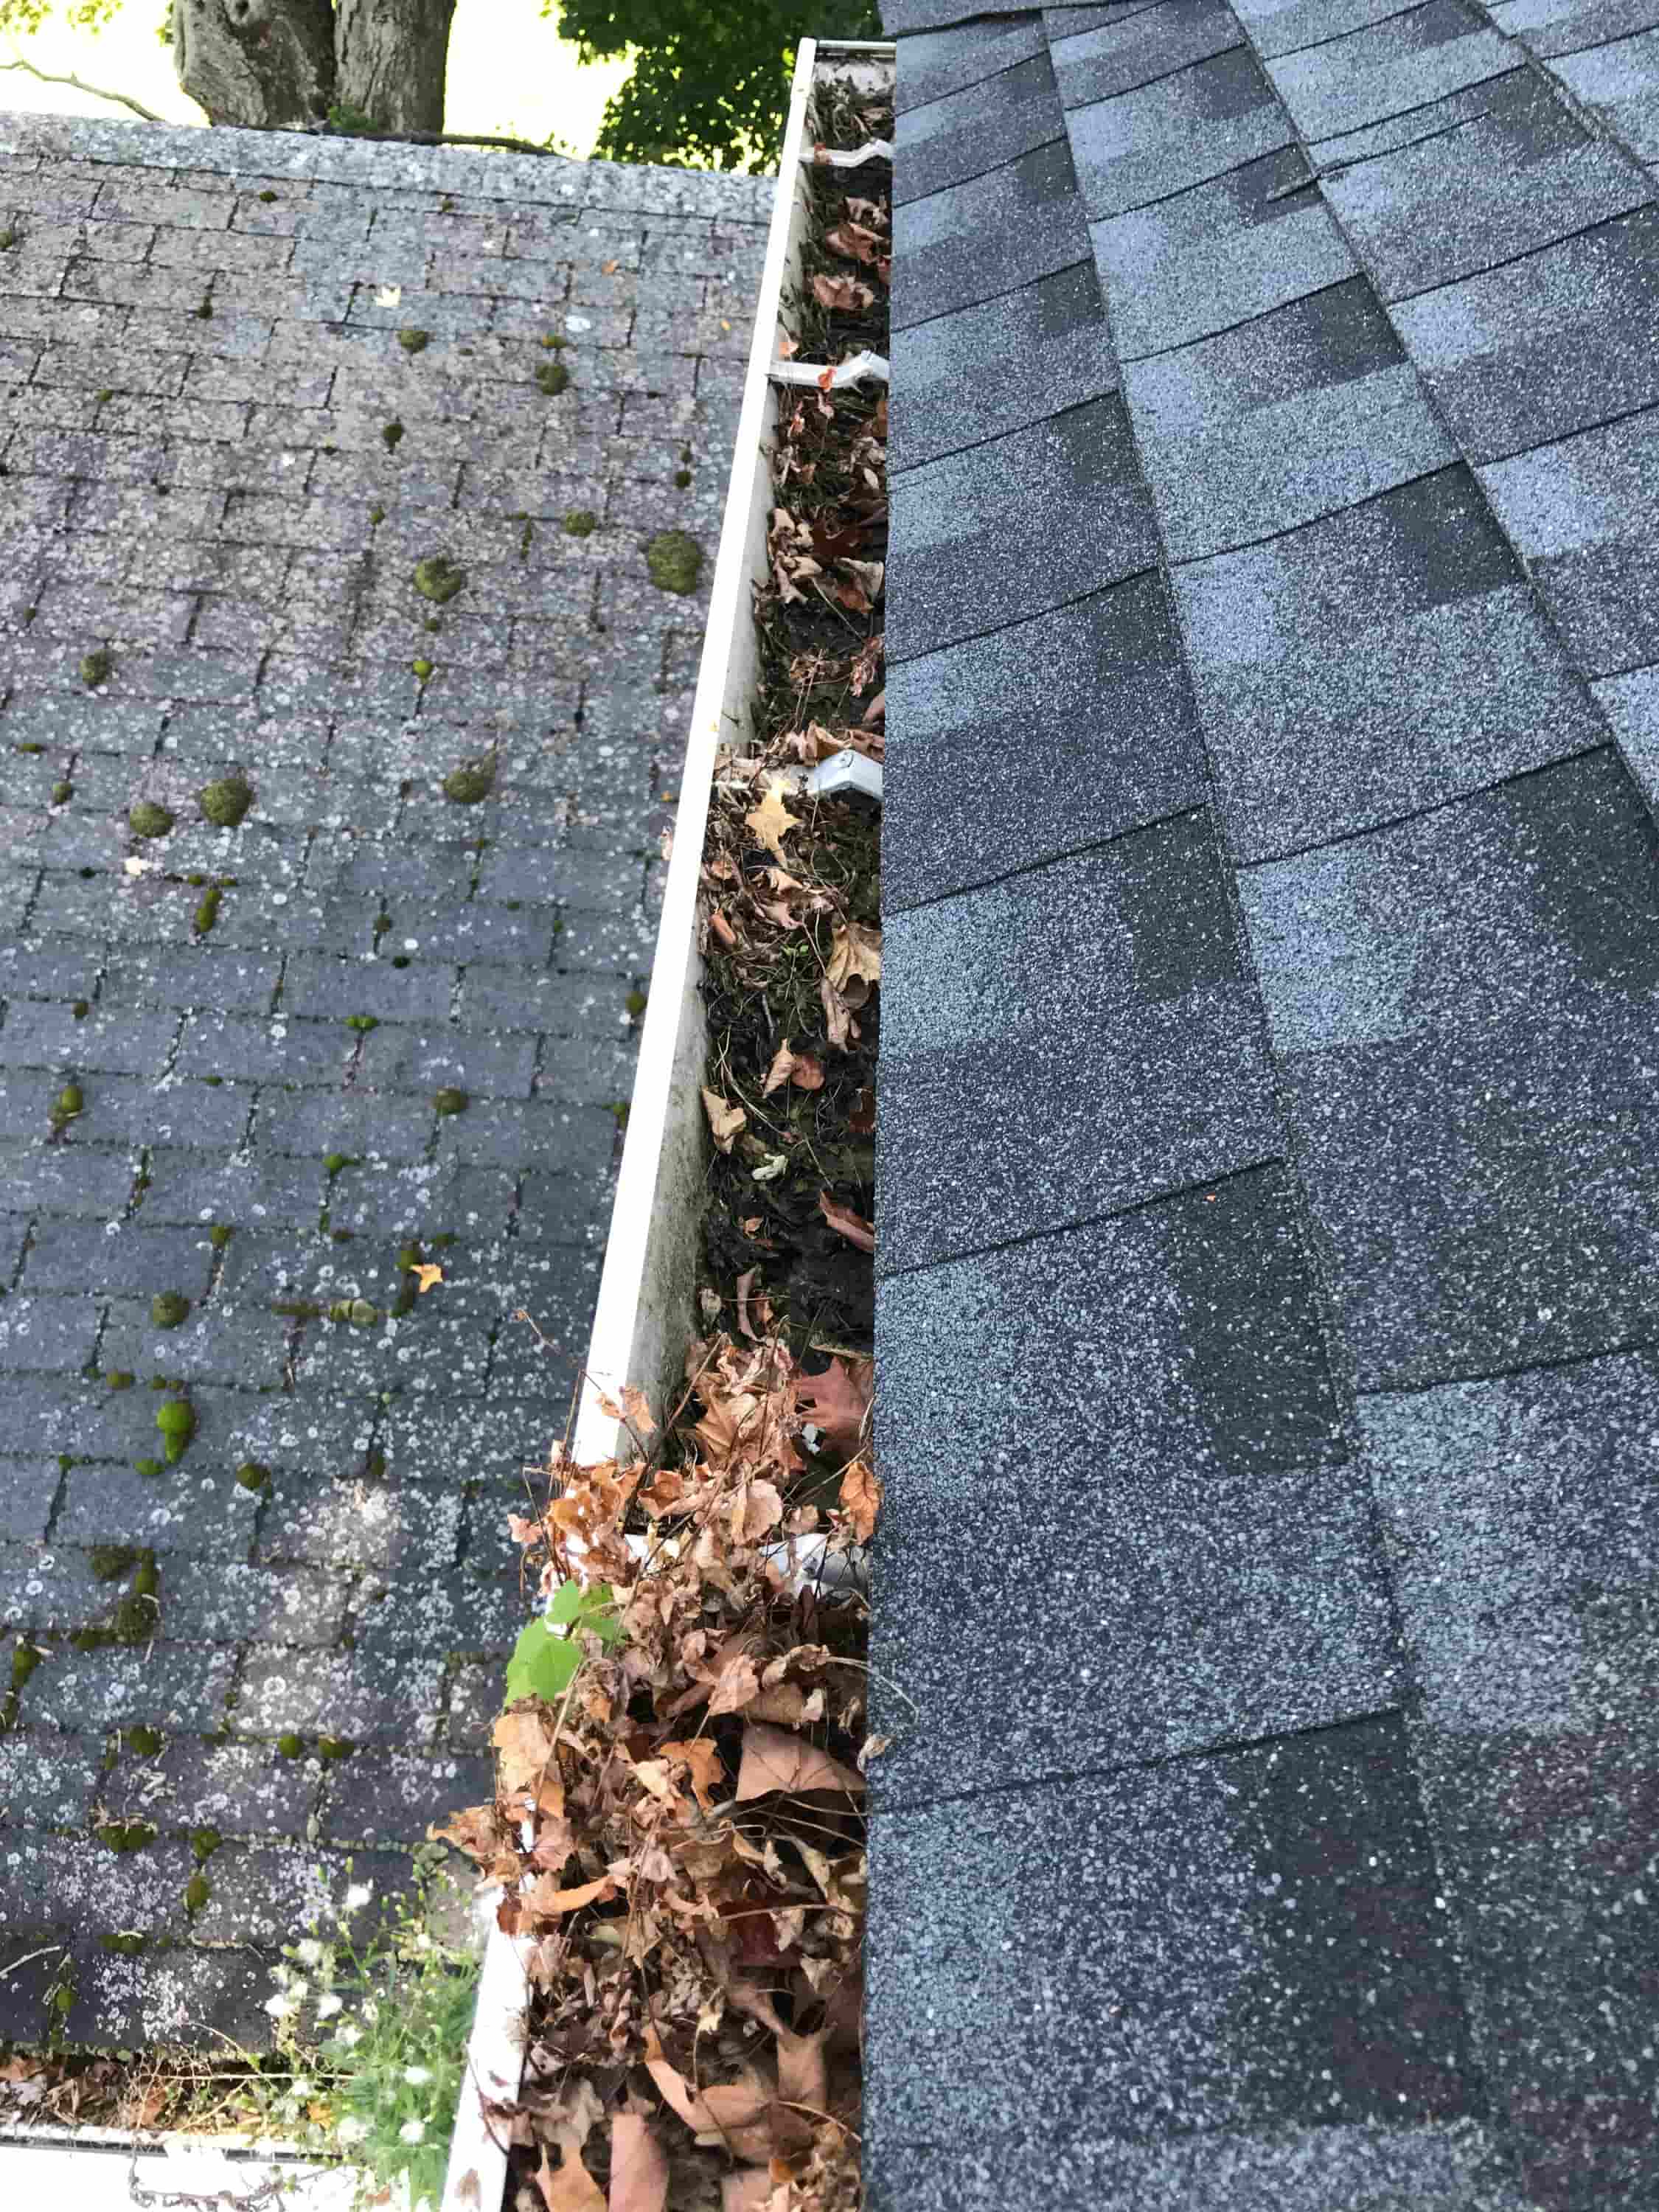 need someone to clean my gutters